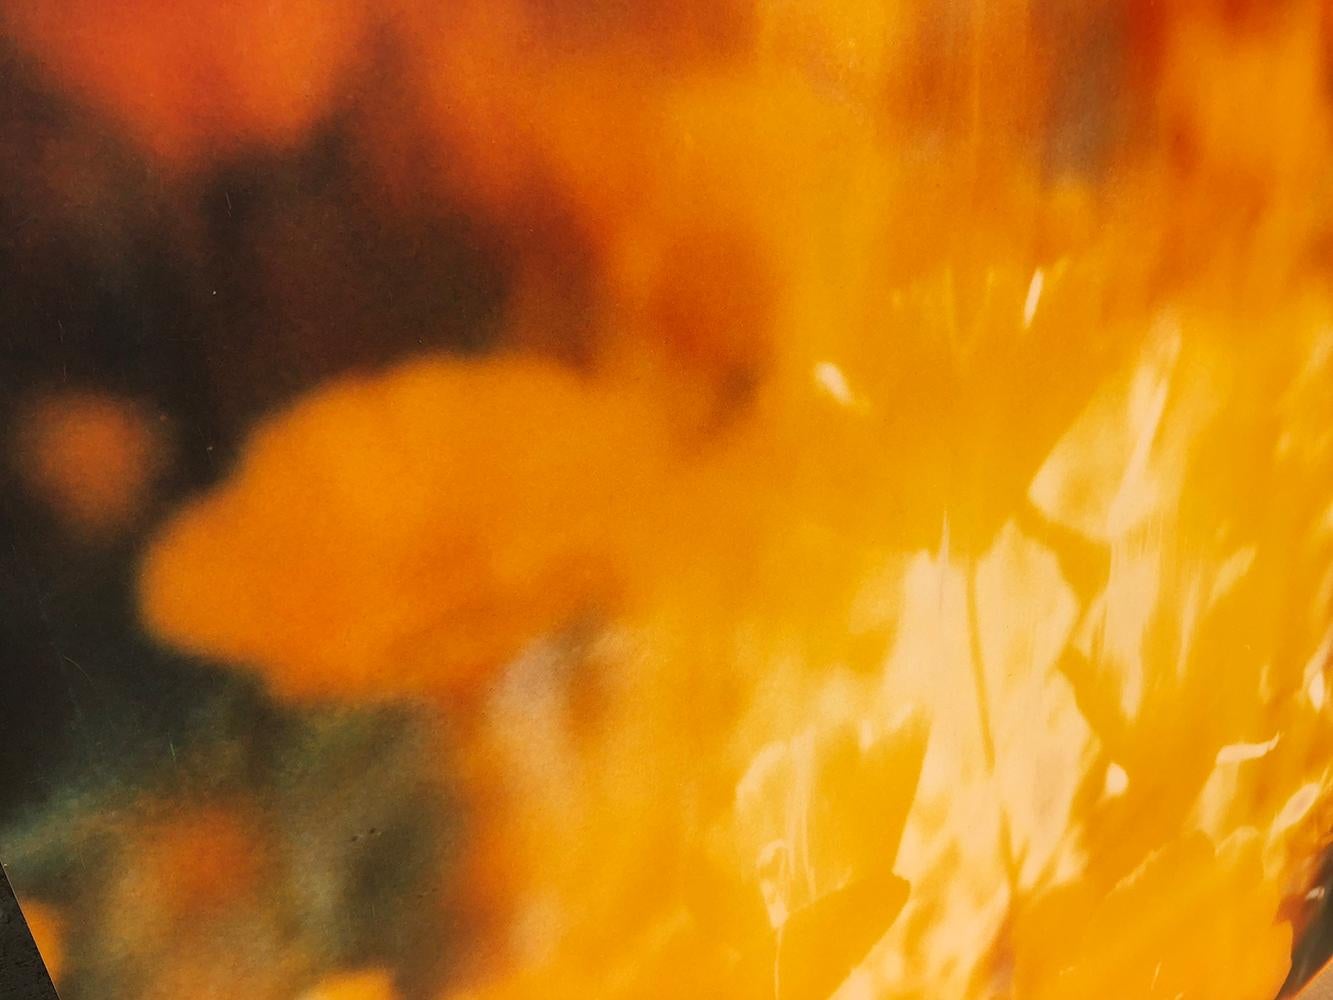 Yellow Flower (The Last Picture Show) 2005,
128x125cm, Edition 4/5, 
analog C-Print, hand-printed by the artist on Fuji Crystal Archive Paper, 
based on a Polaroid, 
signed on verso, 
Artist Inventory 672.04, 
mounted on Aluminum with matte